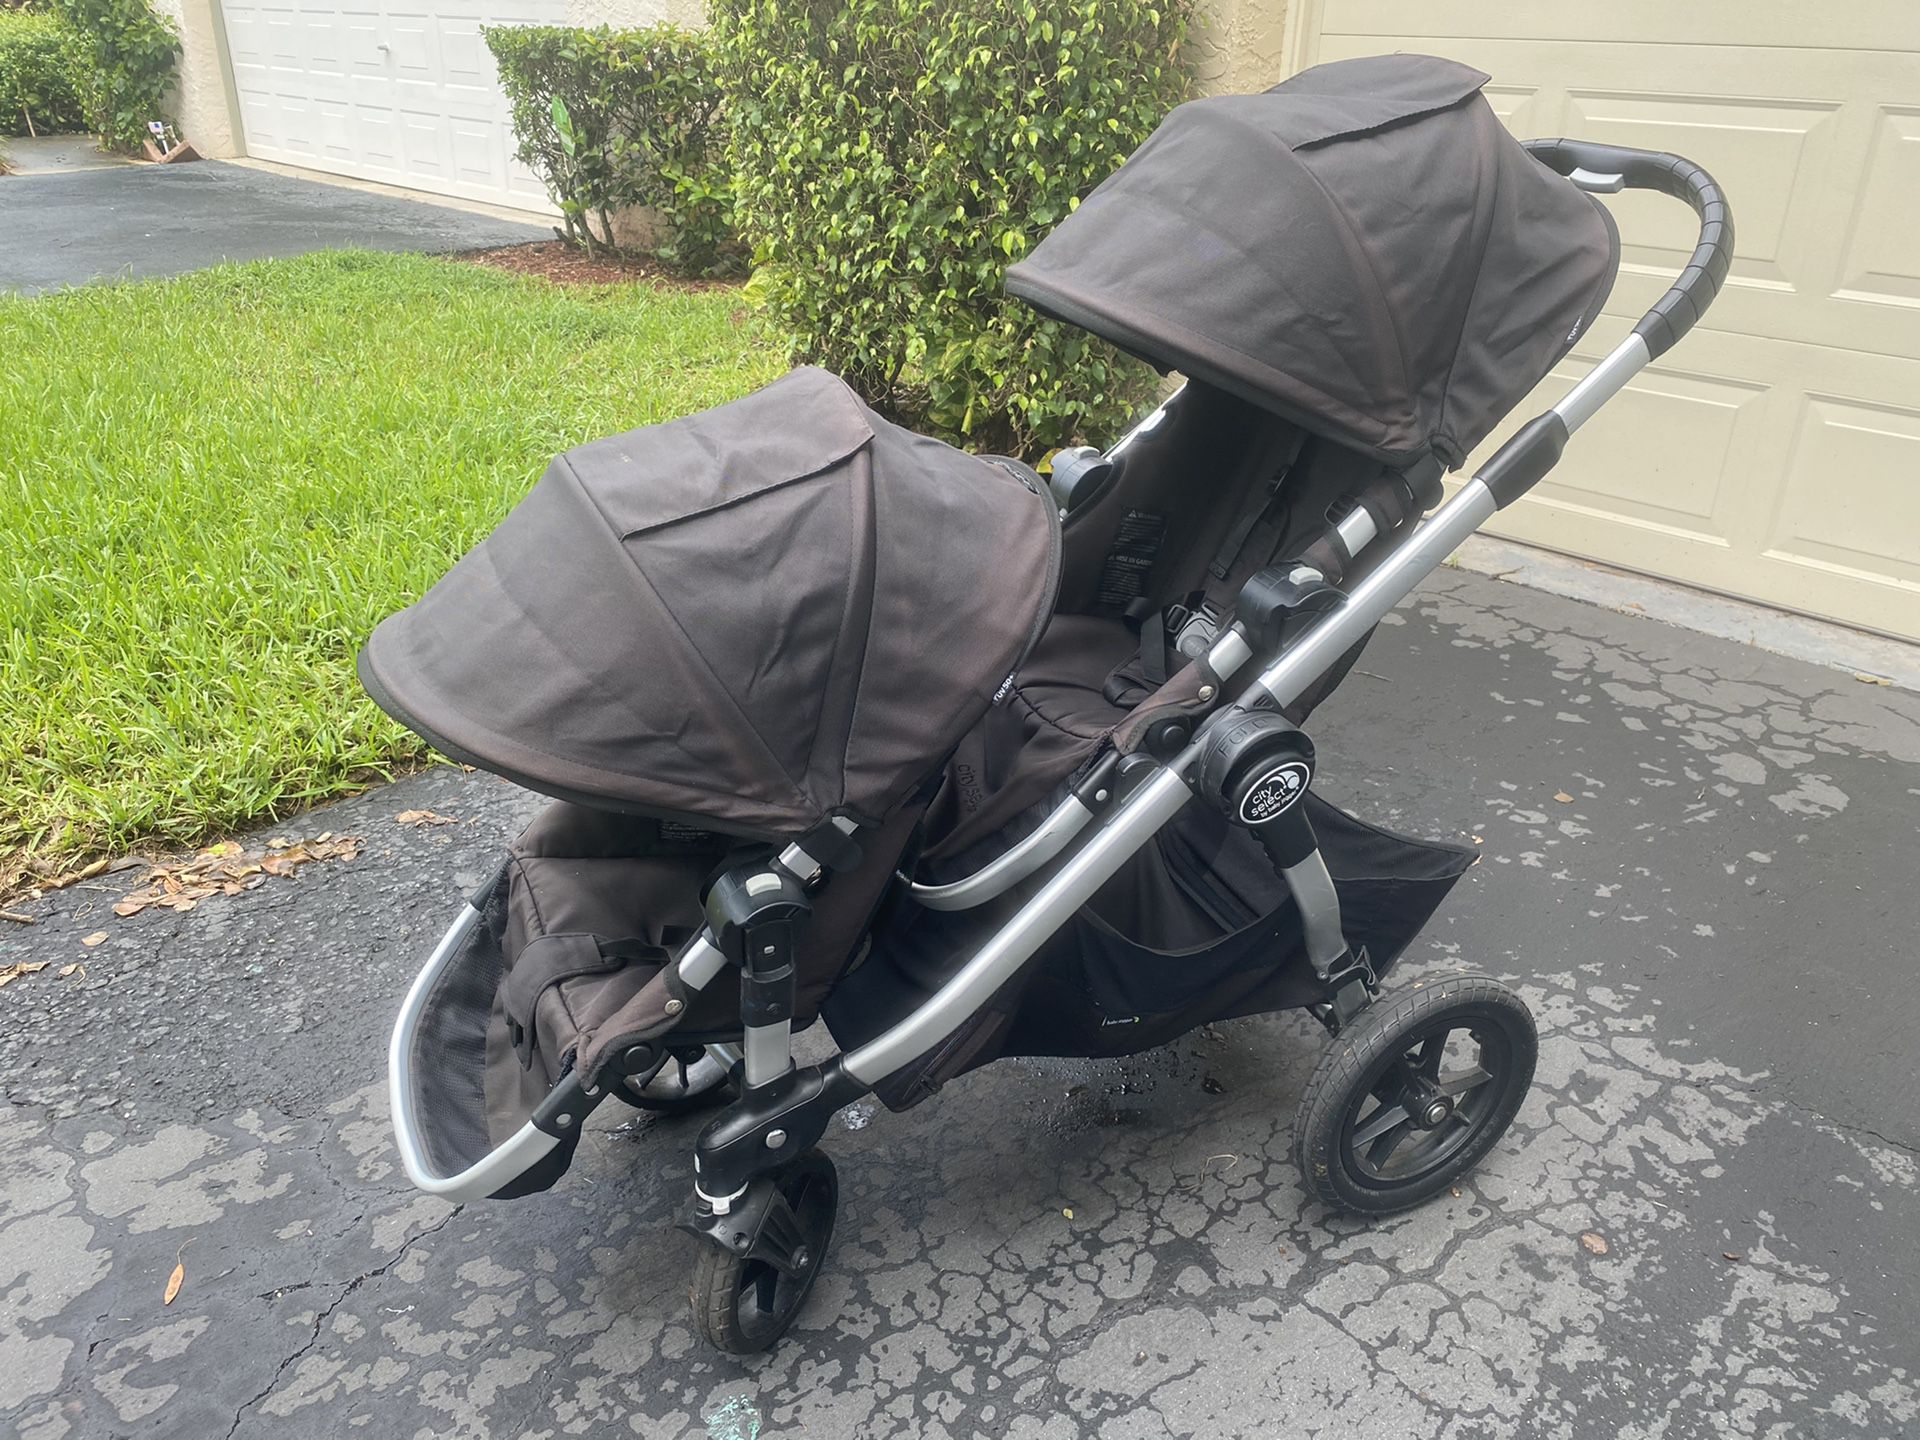 City Select double stroller